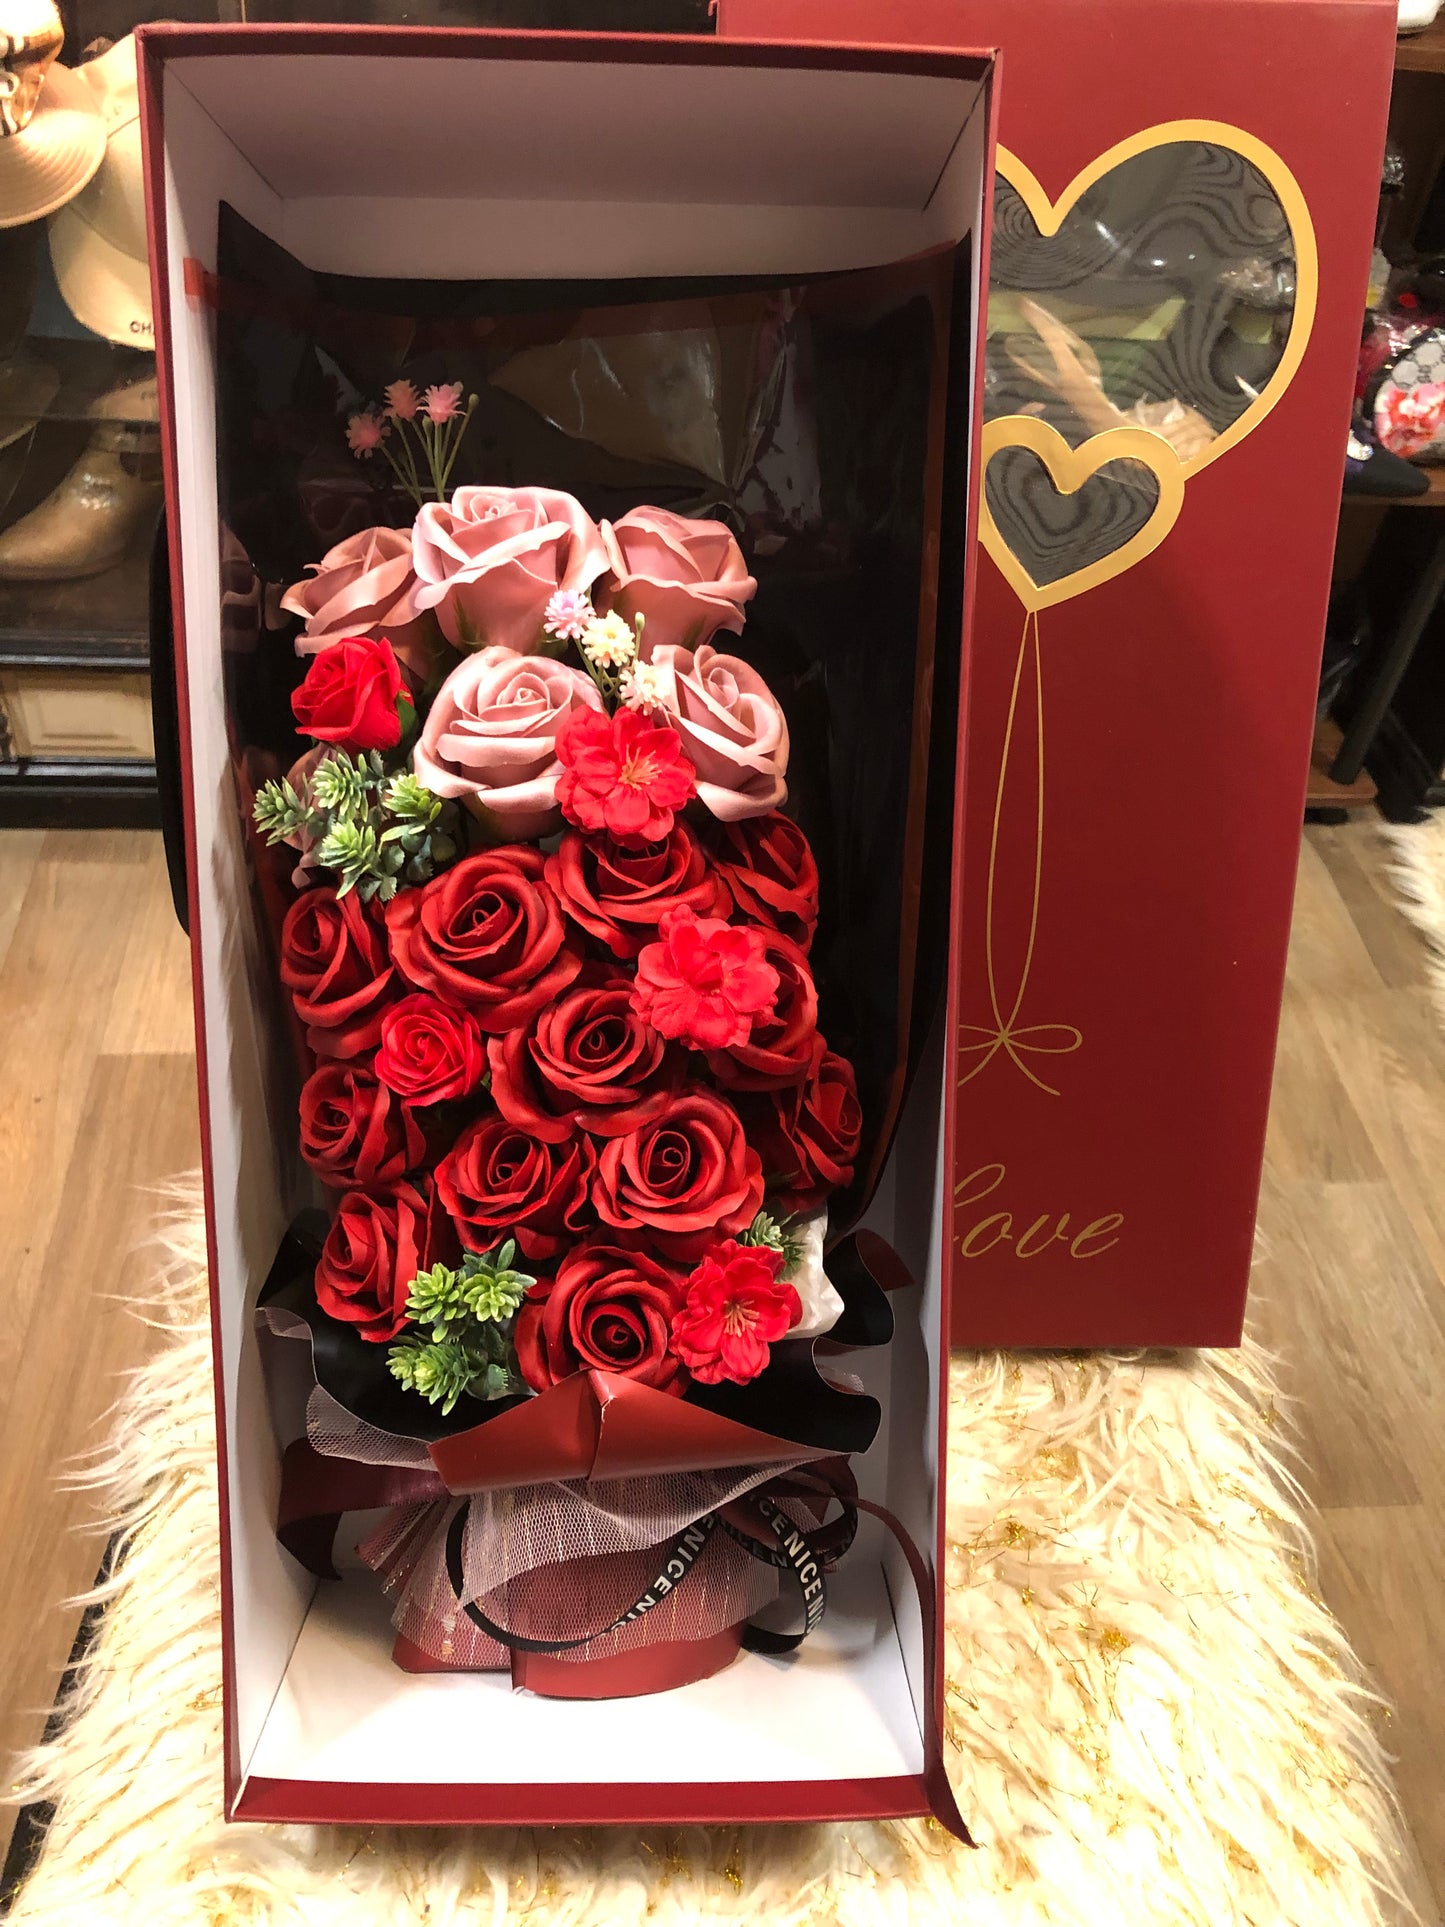 "Just In Time For Mother's Day " 3 Doz. Red/Peach Silk Scented Roses "New Arrival Going Fast"(SOLD OUT